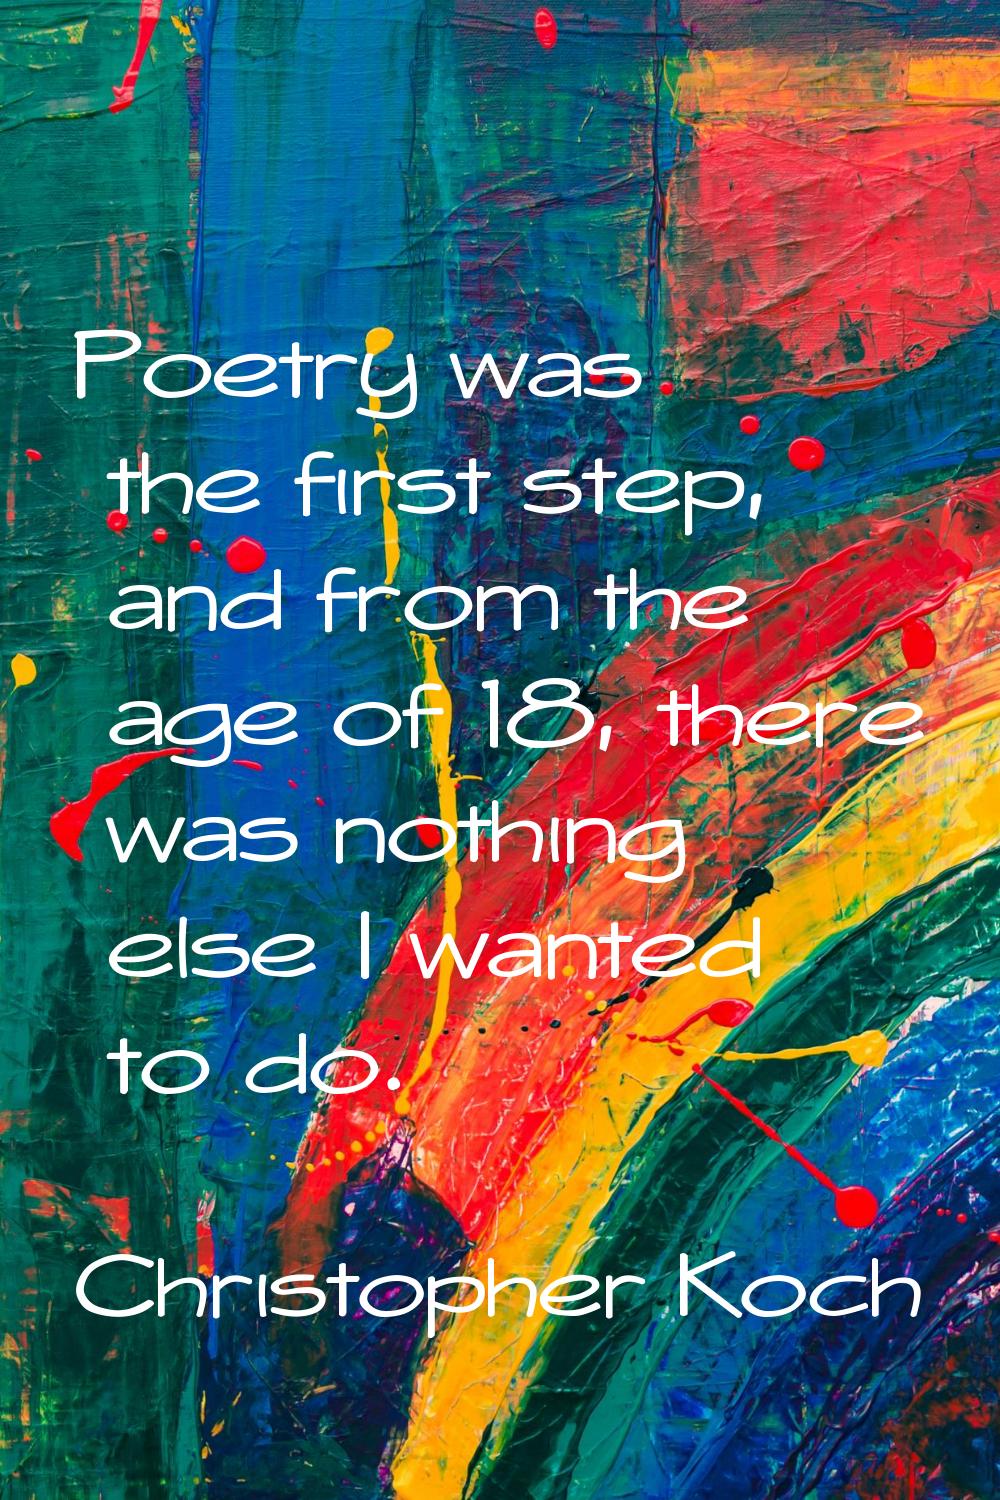 Poetry was the first step, and from the age of 18, there was nothing else I wanted to do.